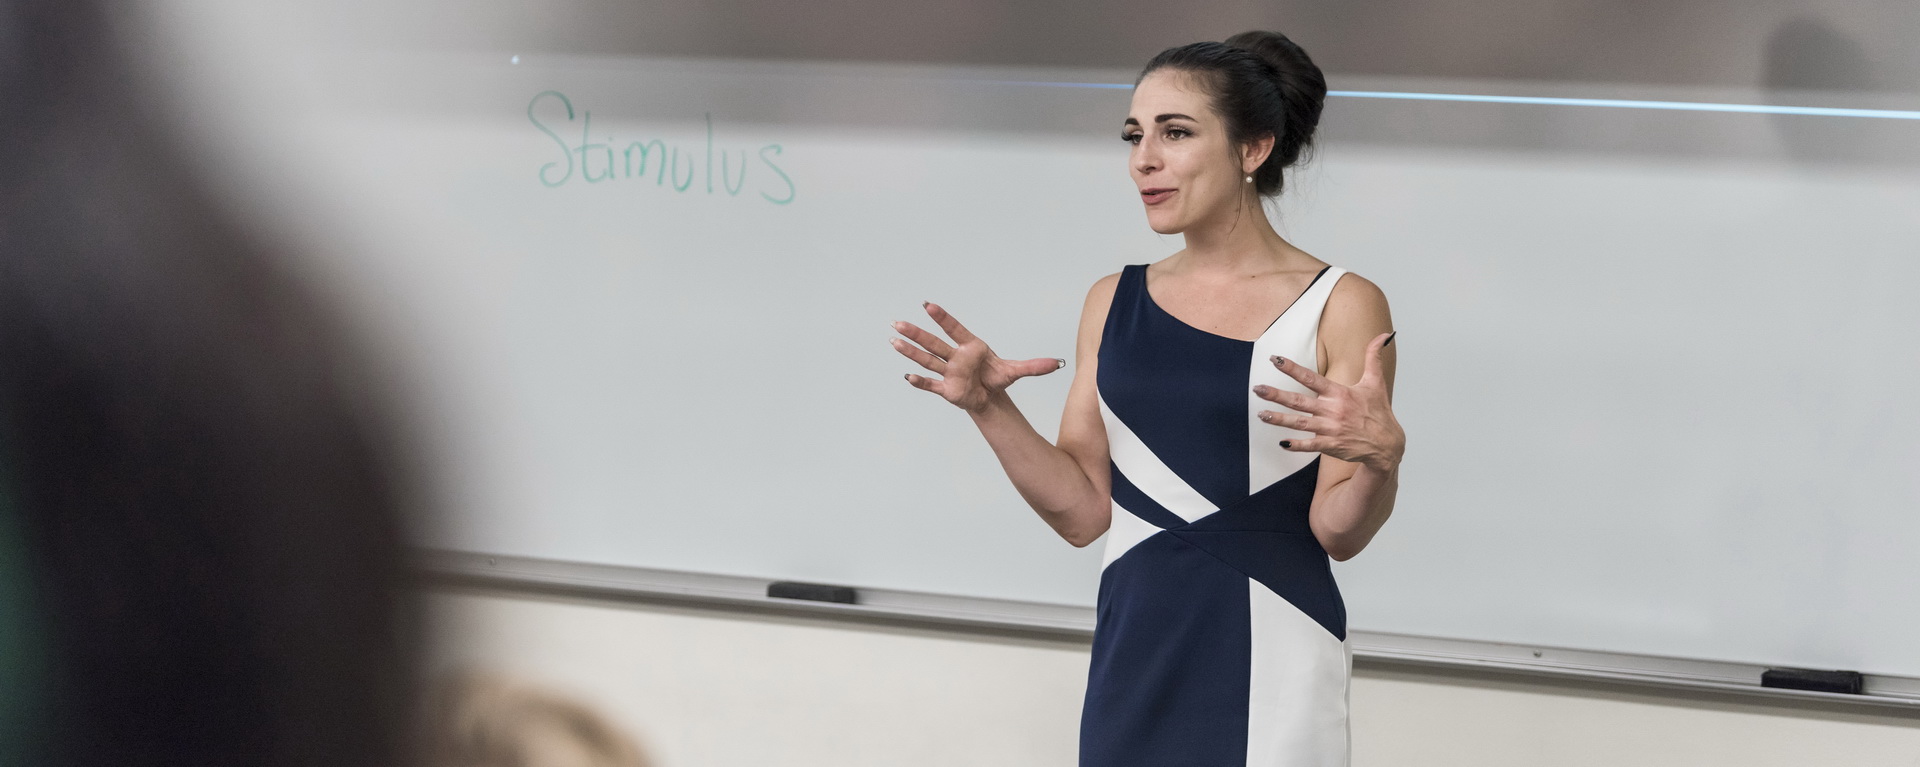 A psychology professor gestures while talking in front of a whiteboard